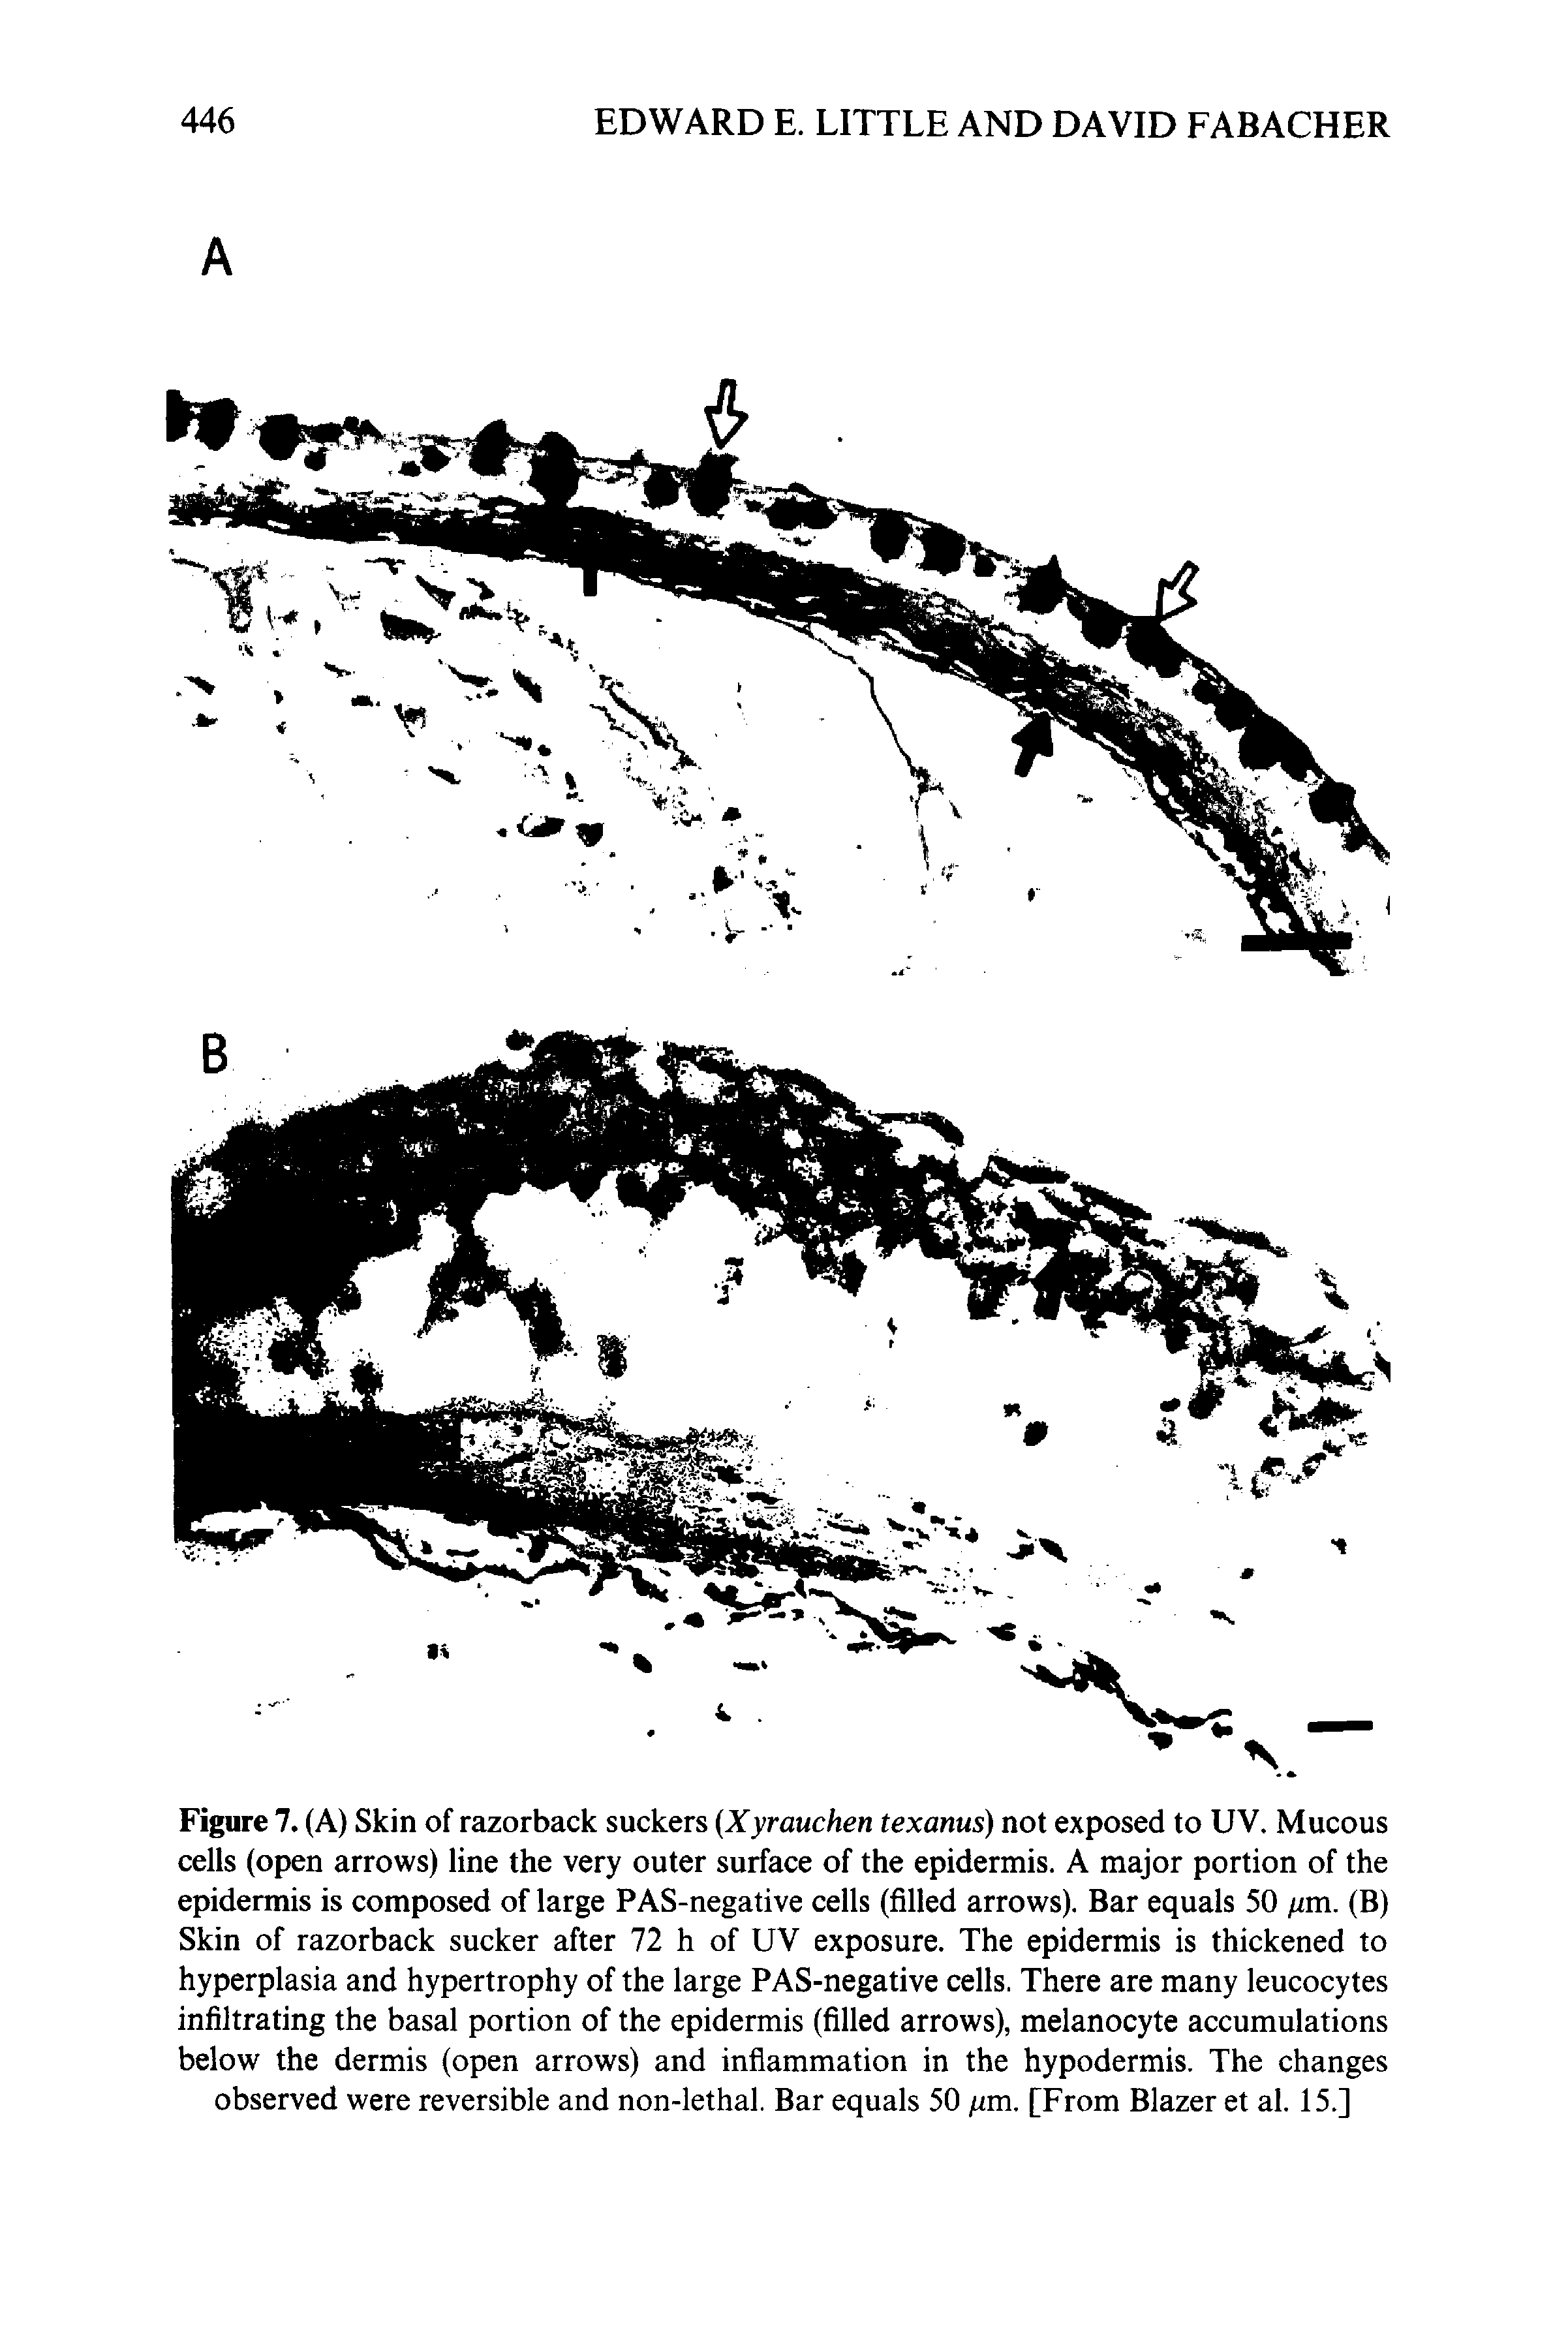 Figure 7. (A) Skin of razorback suckers Xyrauchen texanus) not exposed to UV. Mucous cells (open arrows) line the very outer surface of the epidermis. A major portion of the epidermis is composed of large PAS-negative cells (filled arrows). Bar equals 50 /zm. (B) Skin of razorback sucker after 72 h of UV exposure. The epidermis is thickened to hyperplasia and hypertrophy of the large PAS-negative cells. There are many leucocytes infiltrating the basal portion of the epidermis (filled arrows), melanocyte accumulations below the dermis (open arrows) and inflammation in the hypodermis. The changes observed were reversible and non-lethal. Bar equals 50 /zm. [From Blazer et al. 15.]...